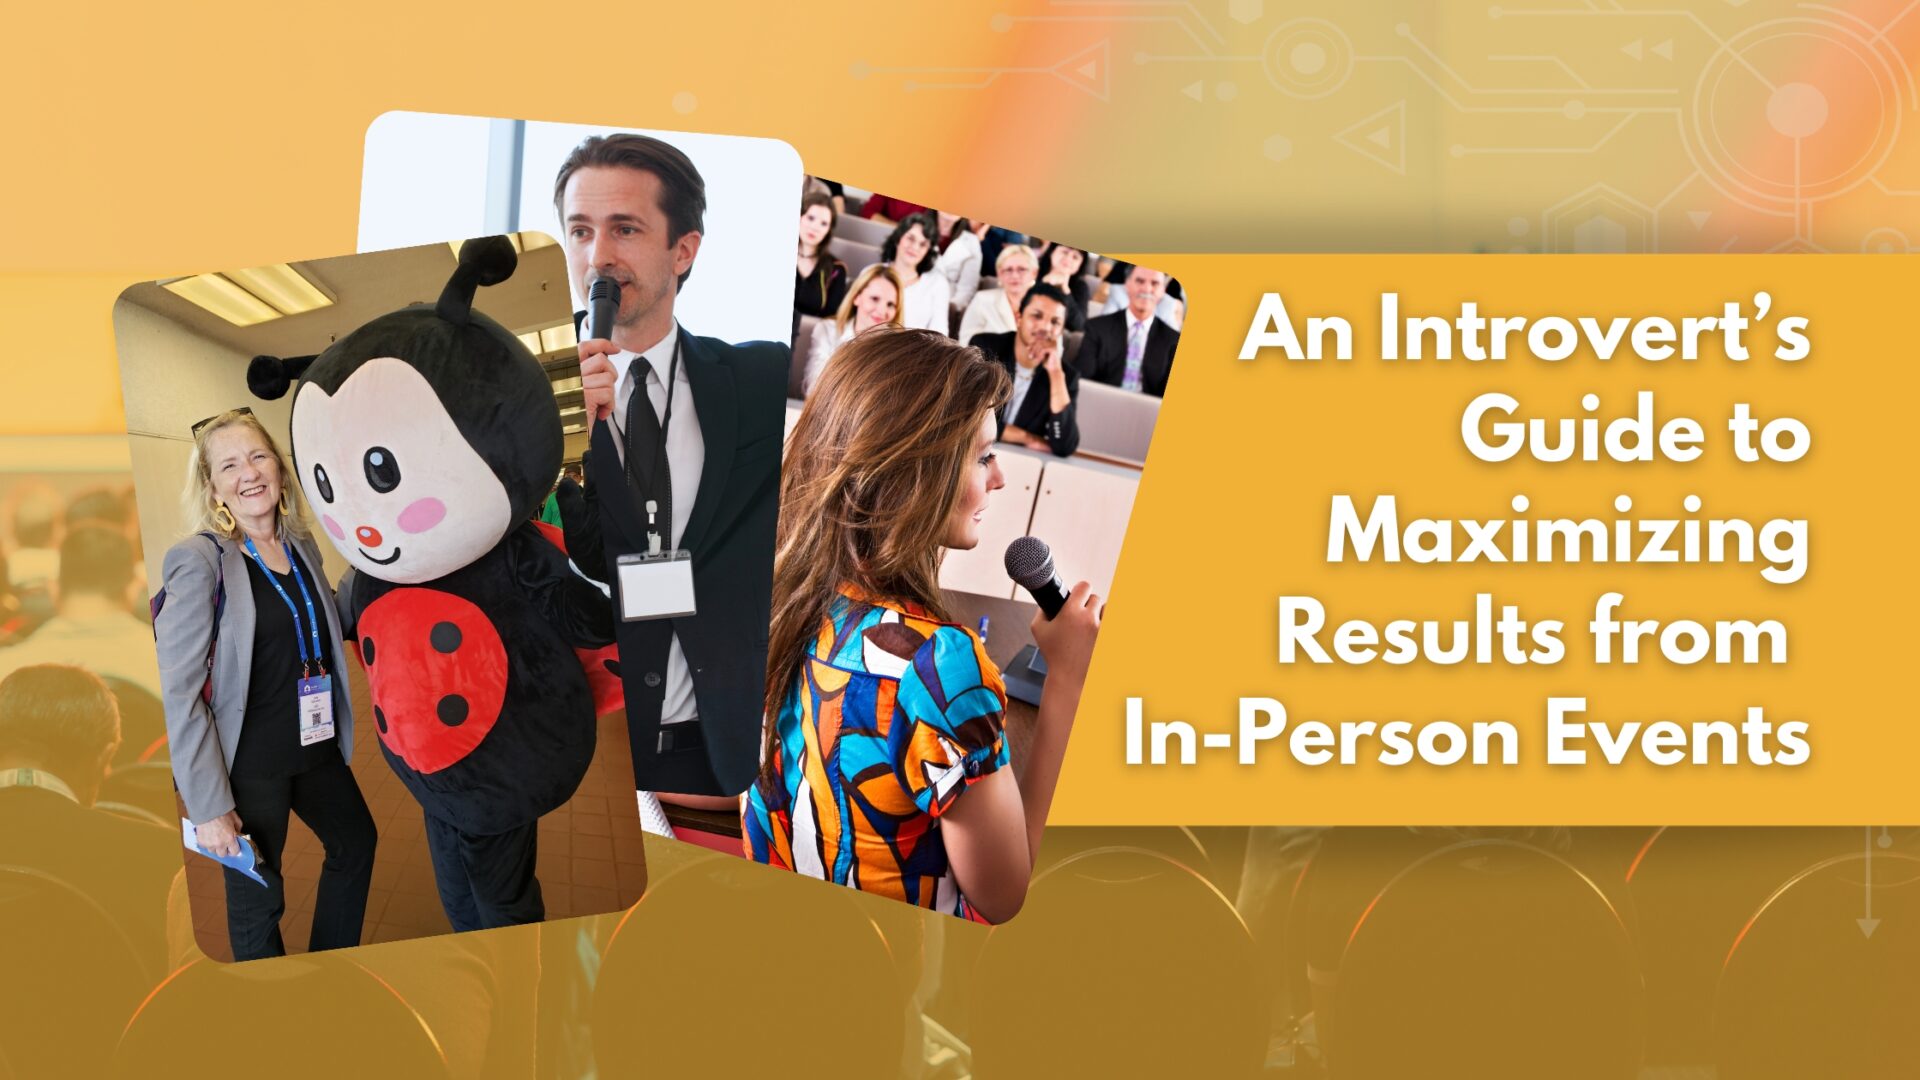 An introvert's guide to maximizing results for in-person events